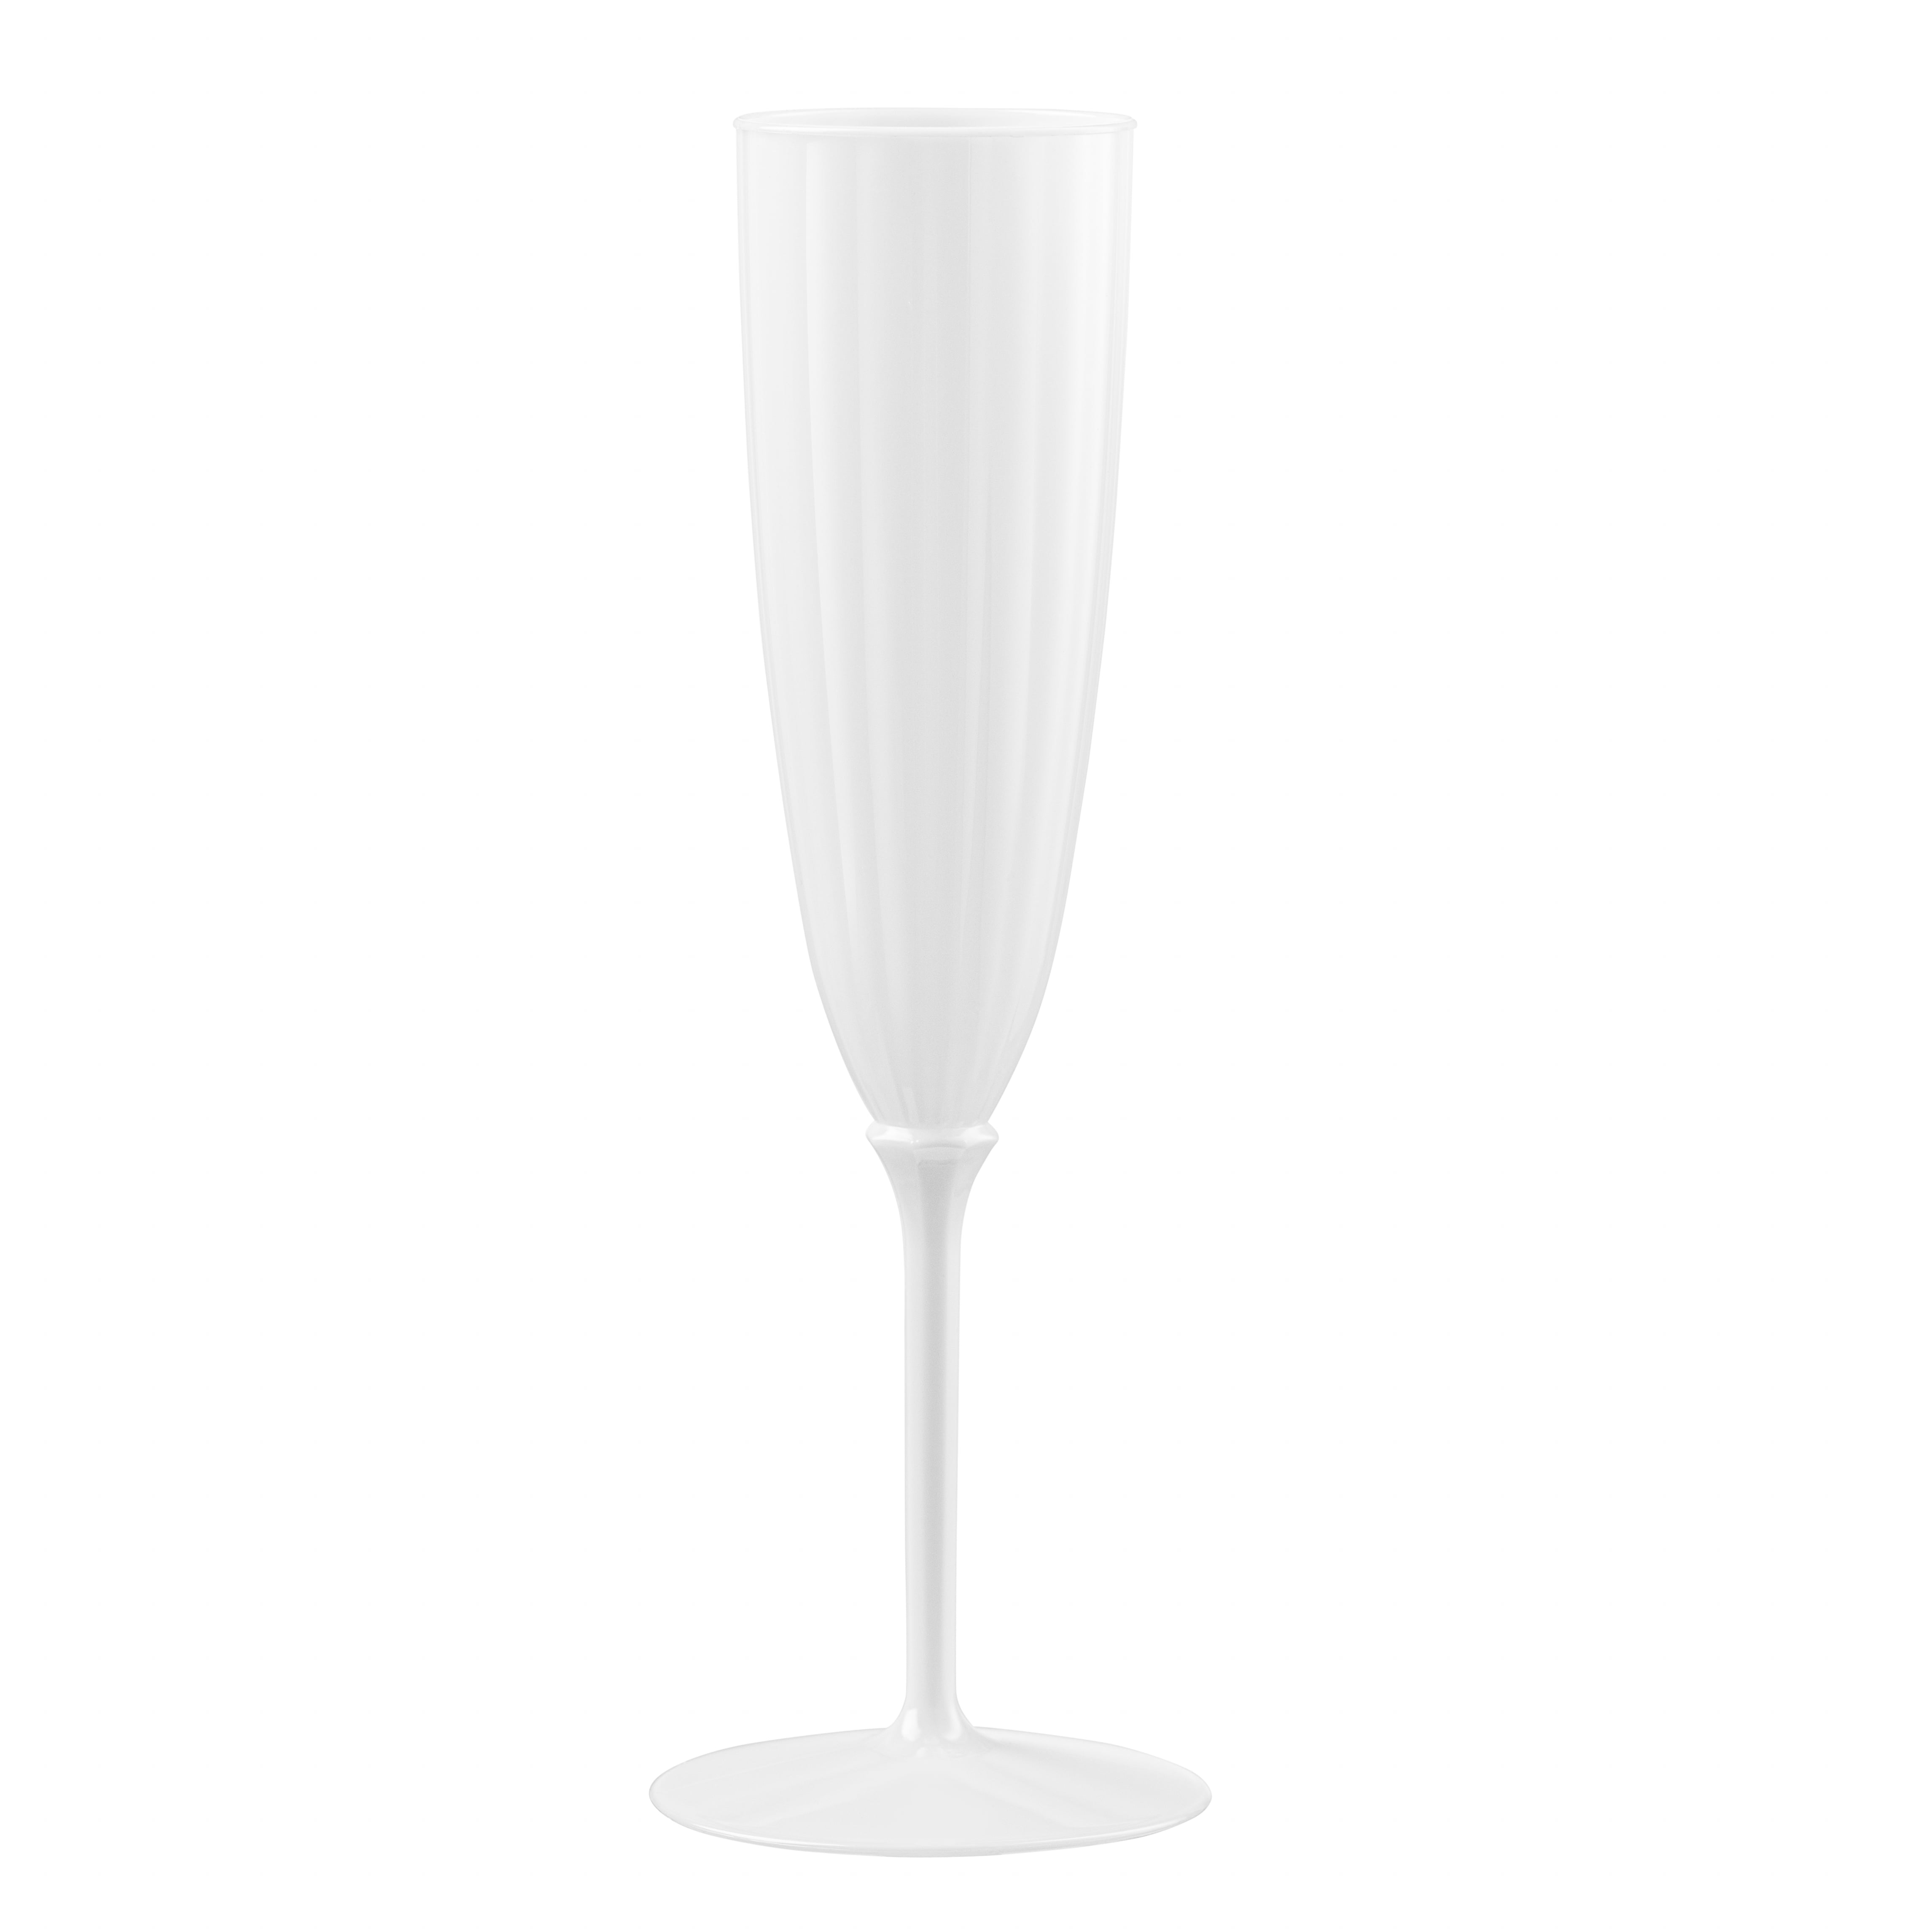 [8 Pack - 6 oz.] Plastic Champagne Flutes White Disposable Champagne  Toasting Glasses Fancy Stemmed Cups for Parties, Weddings, and Dining  Durable